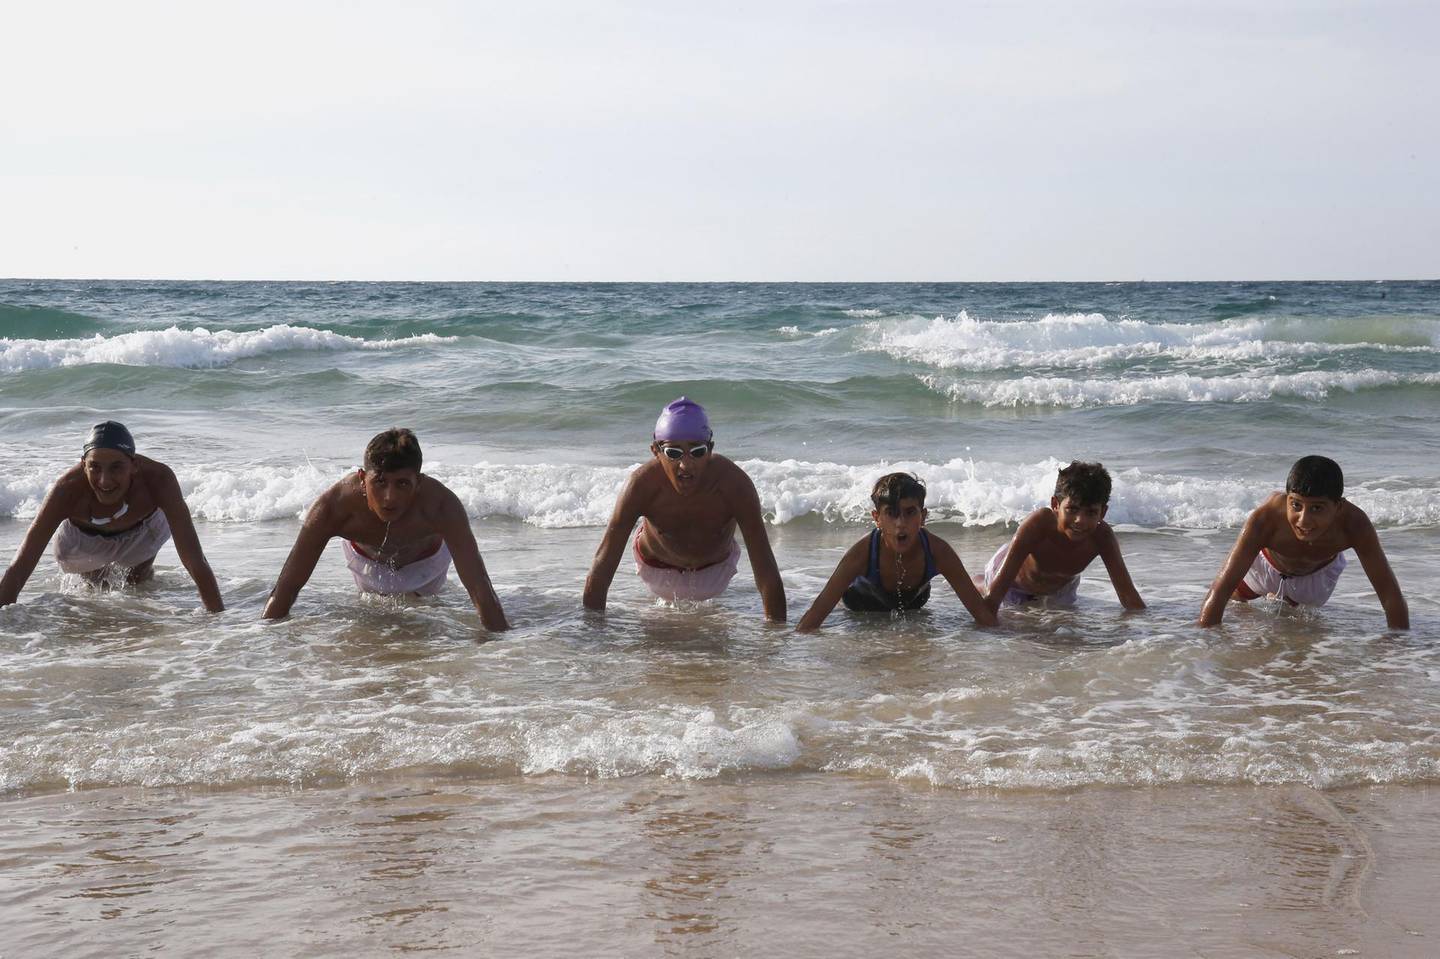 Palestinian children, members of a swimming club, participate in a training session in Beit Lahia in the northern Gaza Strip, on October 4, 2018. On one of the world's most polluted beaches, 30 young Palestinians dive head first into the sea off the coast of Gaza, their minds filled with dreams of Olympic glory. 
Aged between 11 and 16, they make up a rare swimming club in the Gaza Strip, and perhaps its only mixed-sex one.
 / AFP / SAID KHATIB
